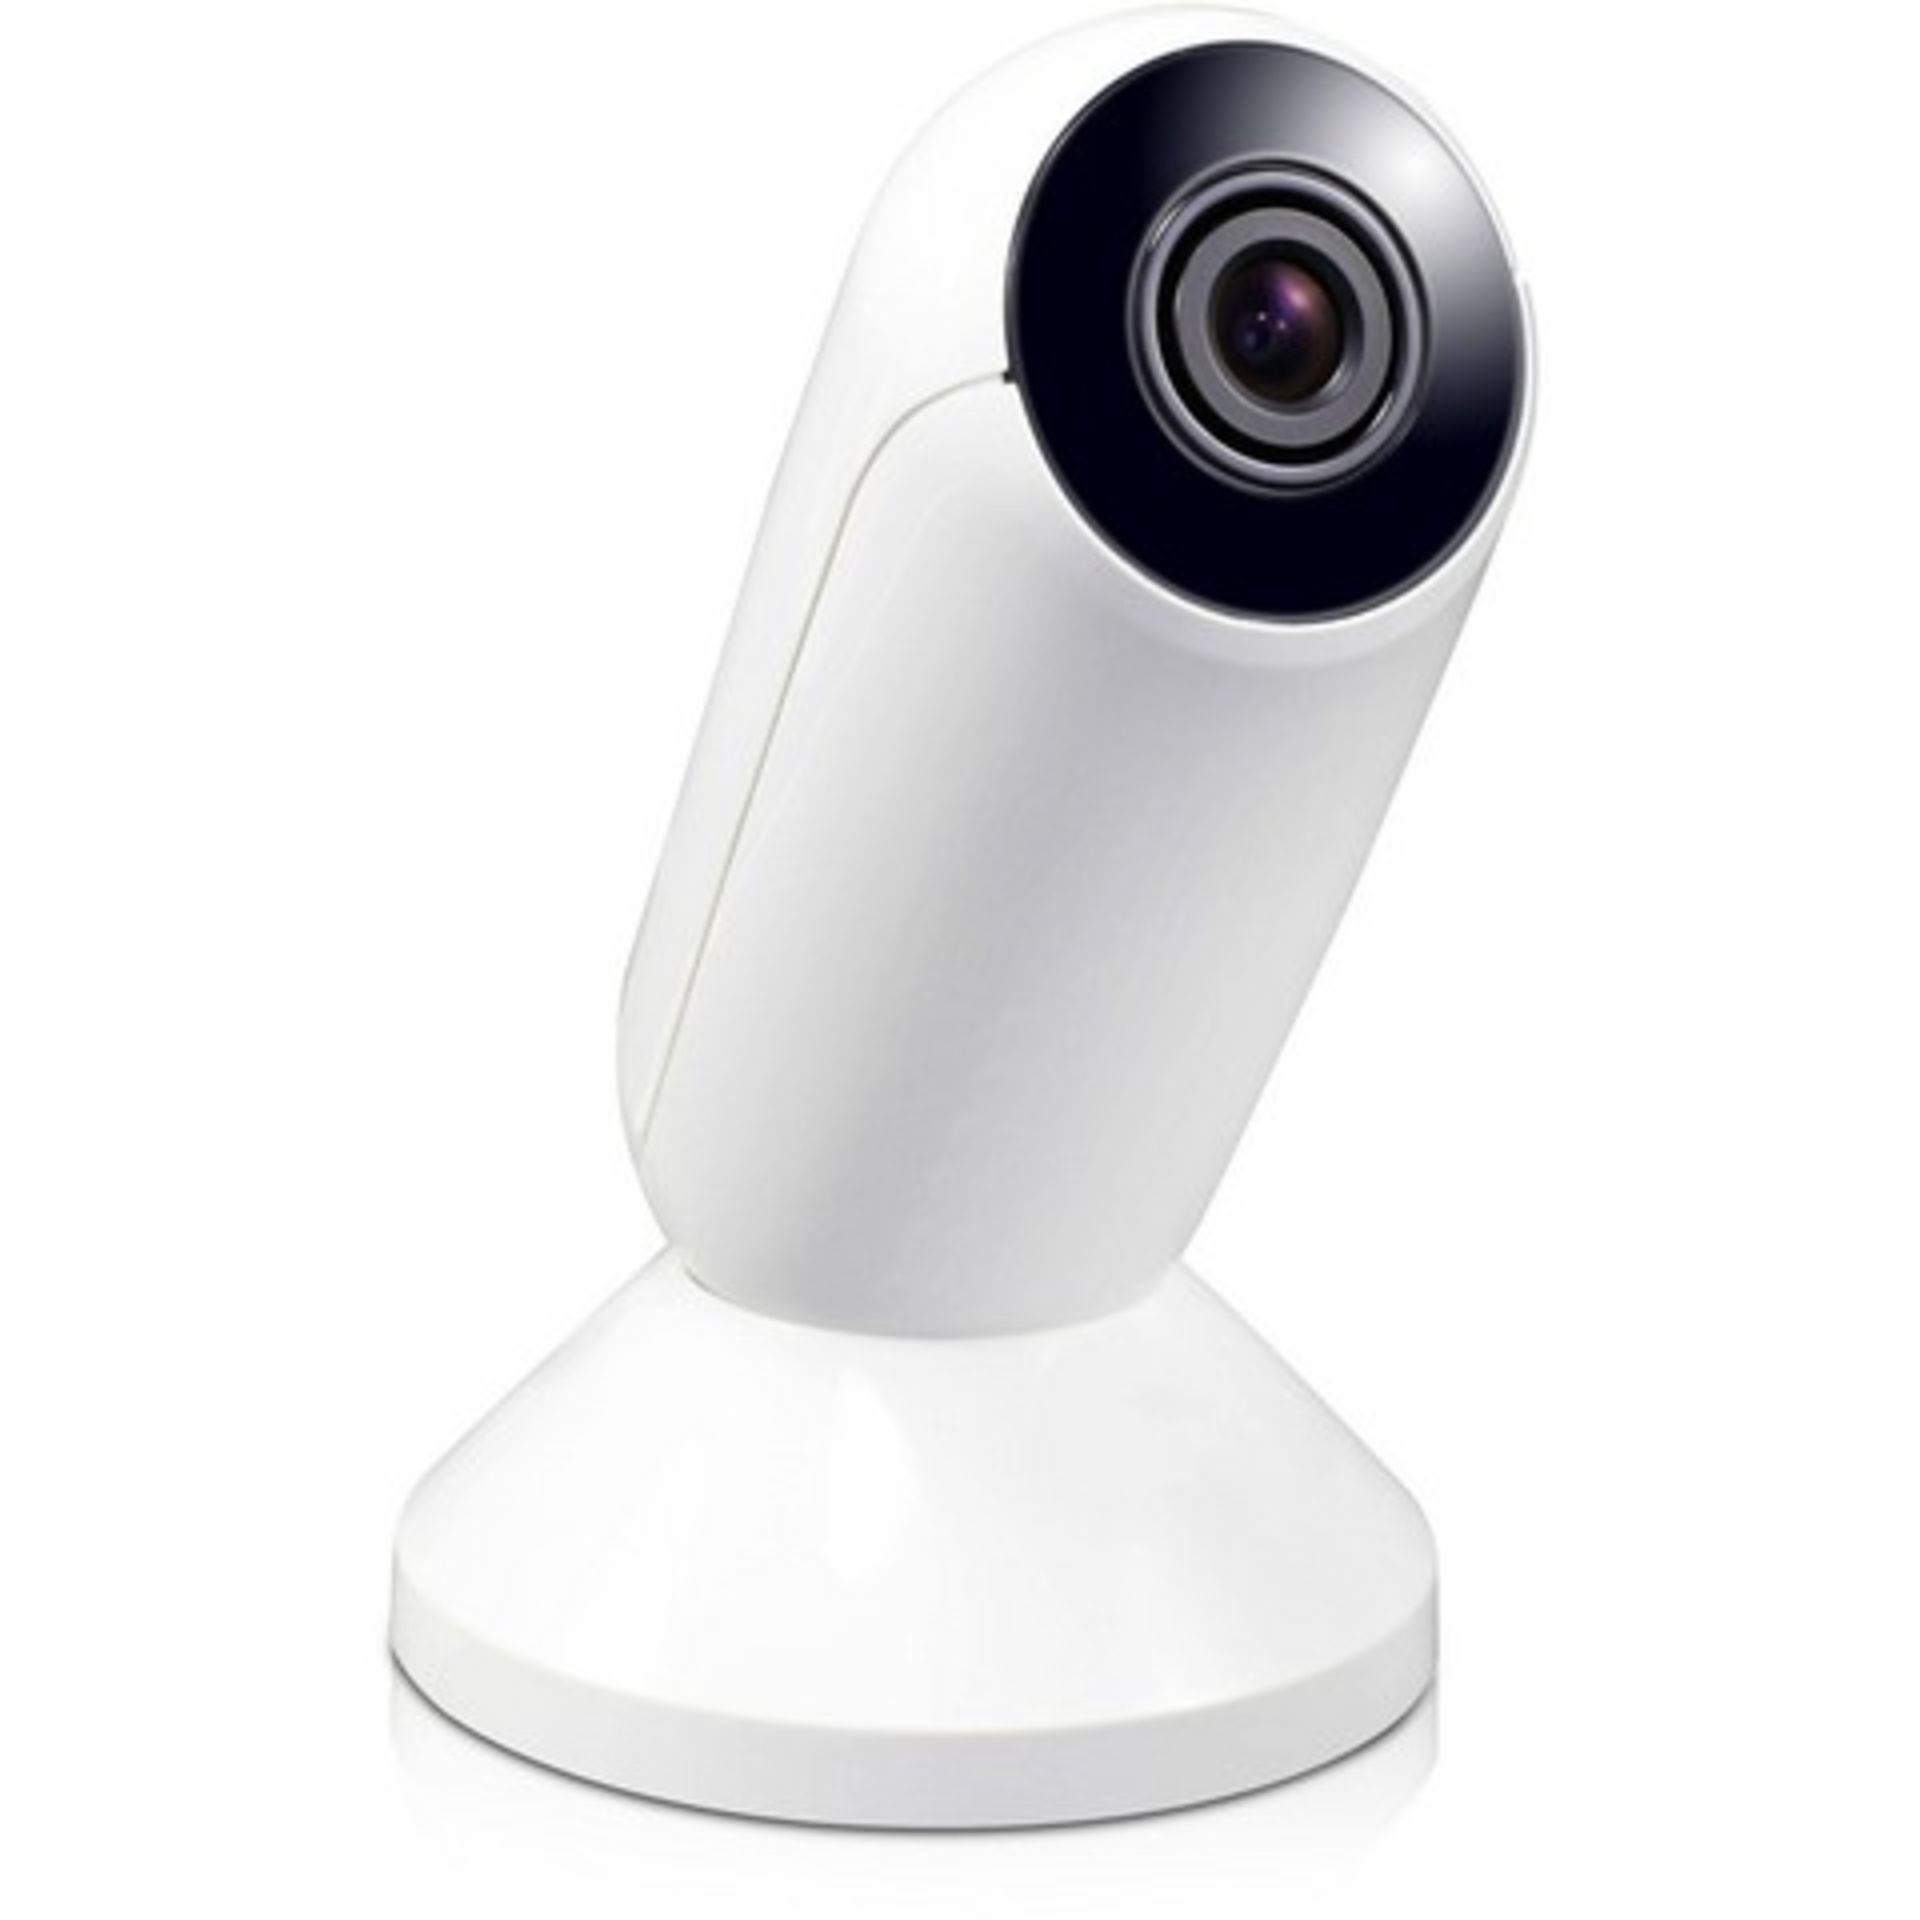 V Grade A Swann One SoundView Indoor Camera - Wirelessly Records HD Video And Detects Specific